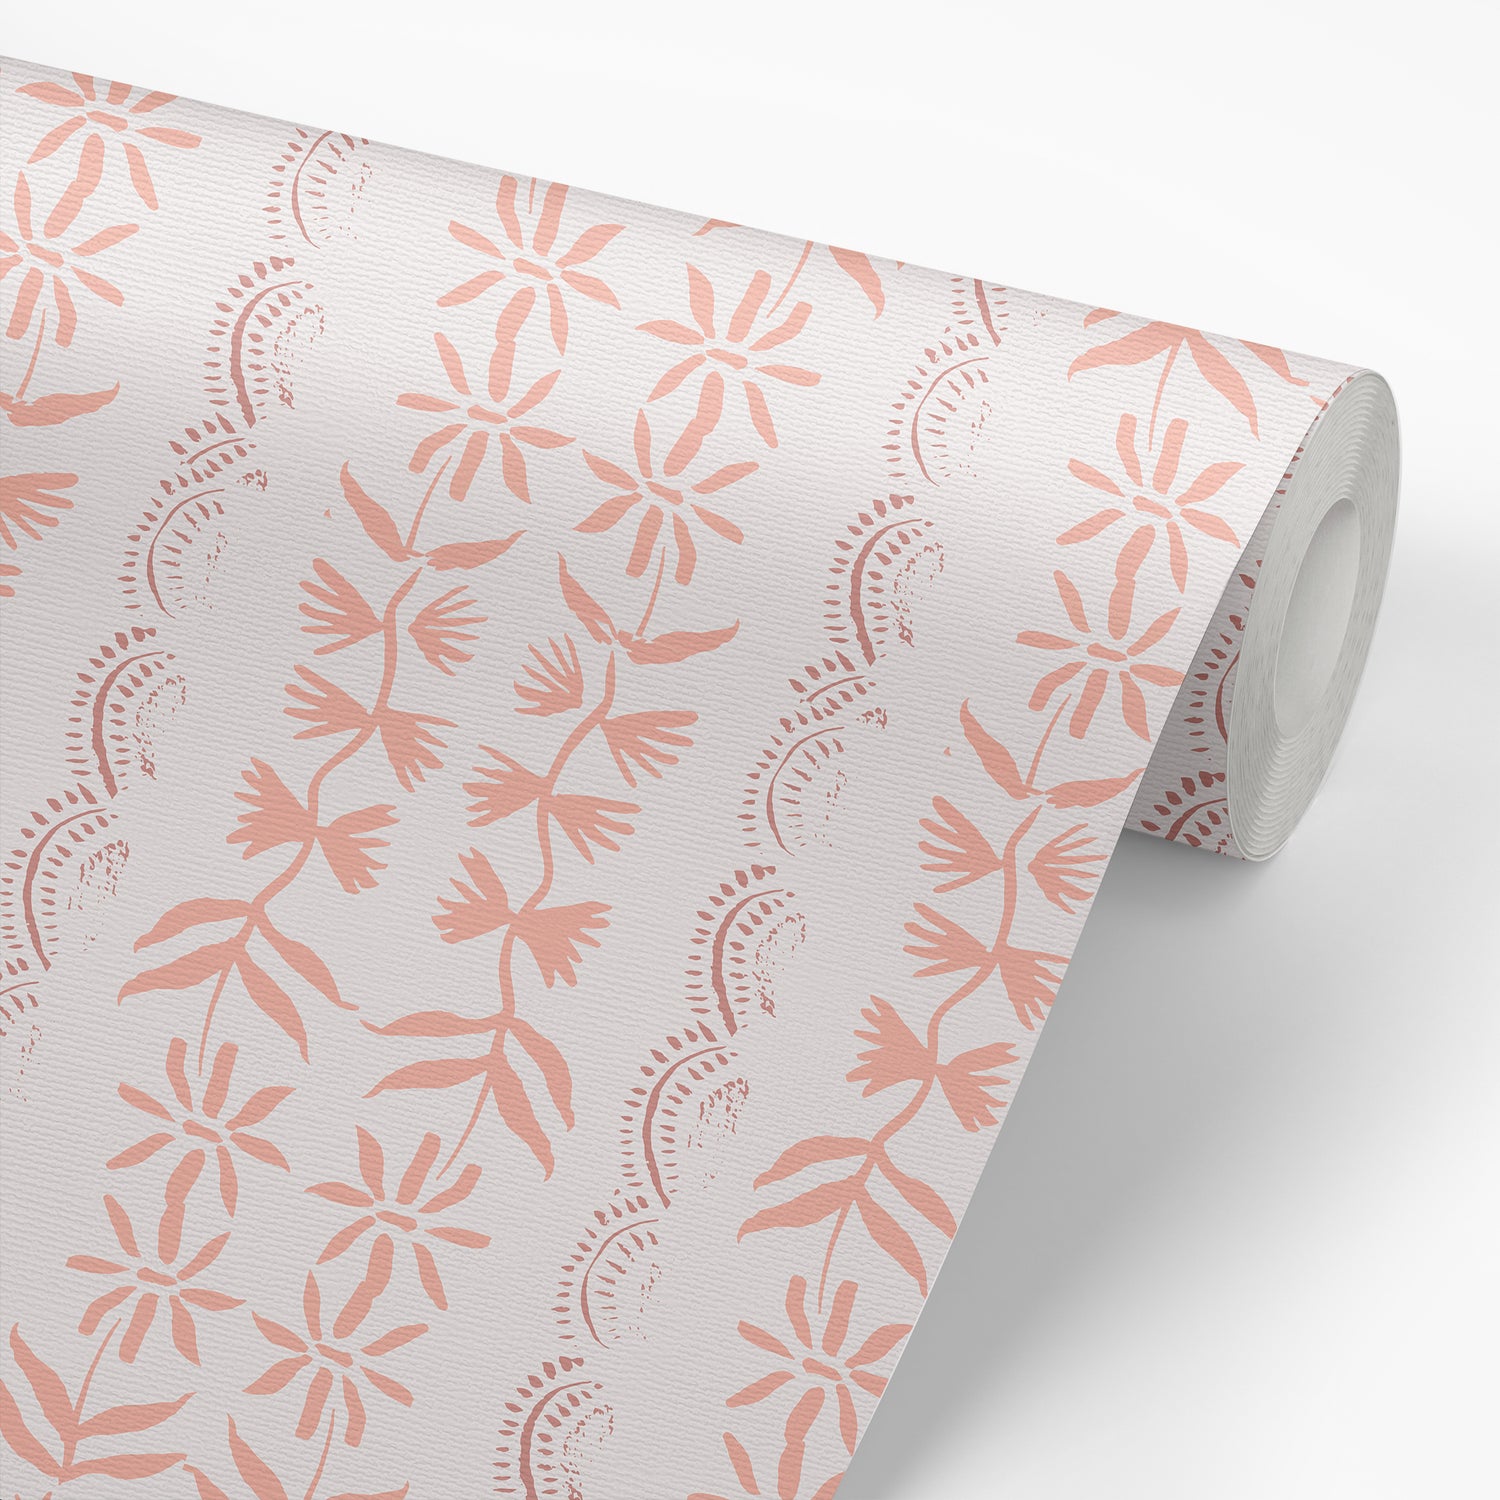 Wallpaper roll featuring Emeline in dusk that beautifully highlights a unique floral design with breathtaking shades of peach, rose, and cream.